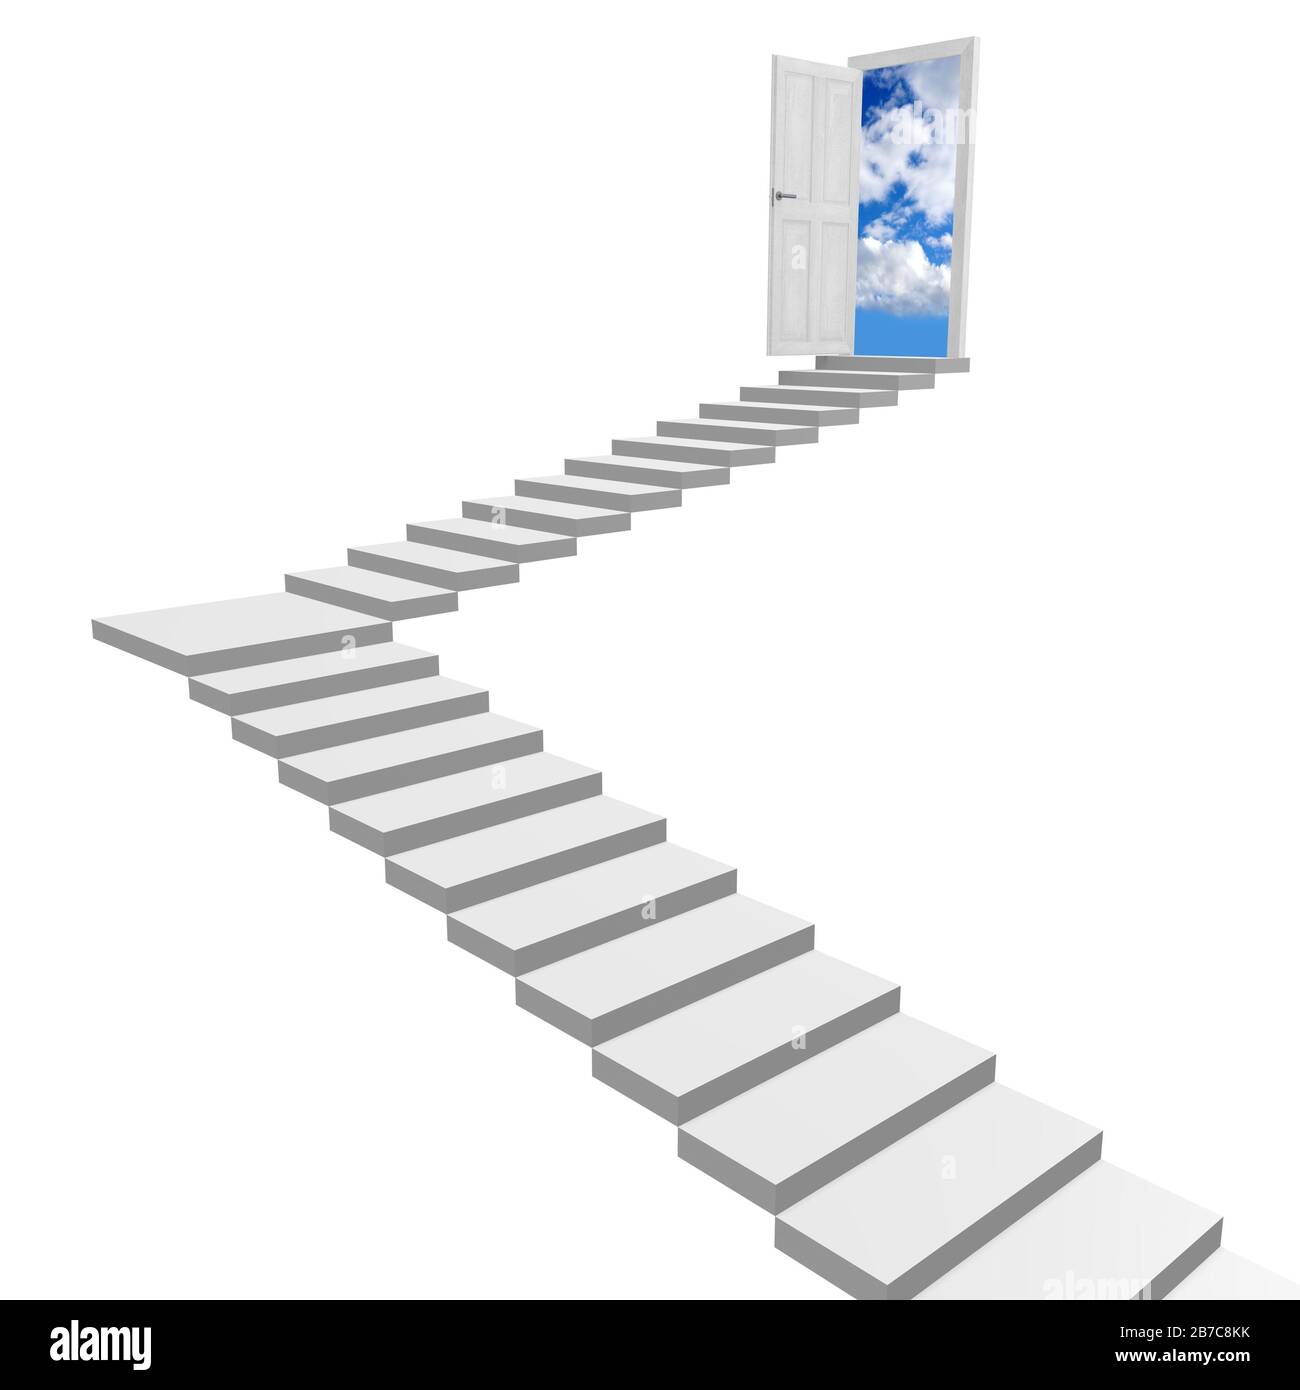 15,307 Stairway Heaven Images, Stock Photos, 3D objects, & Vectors